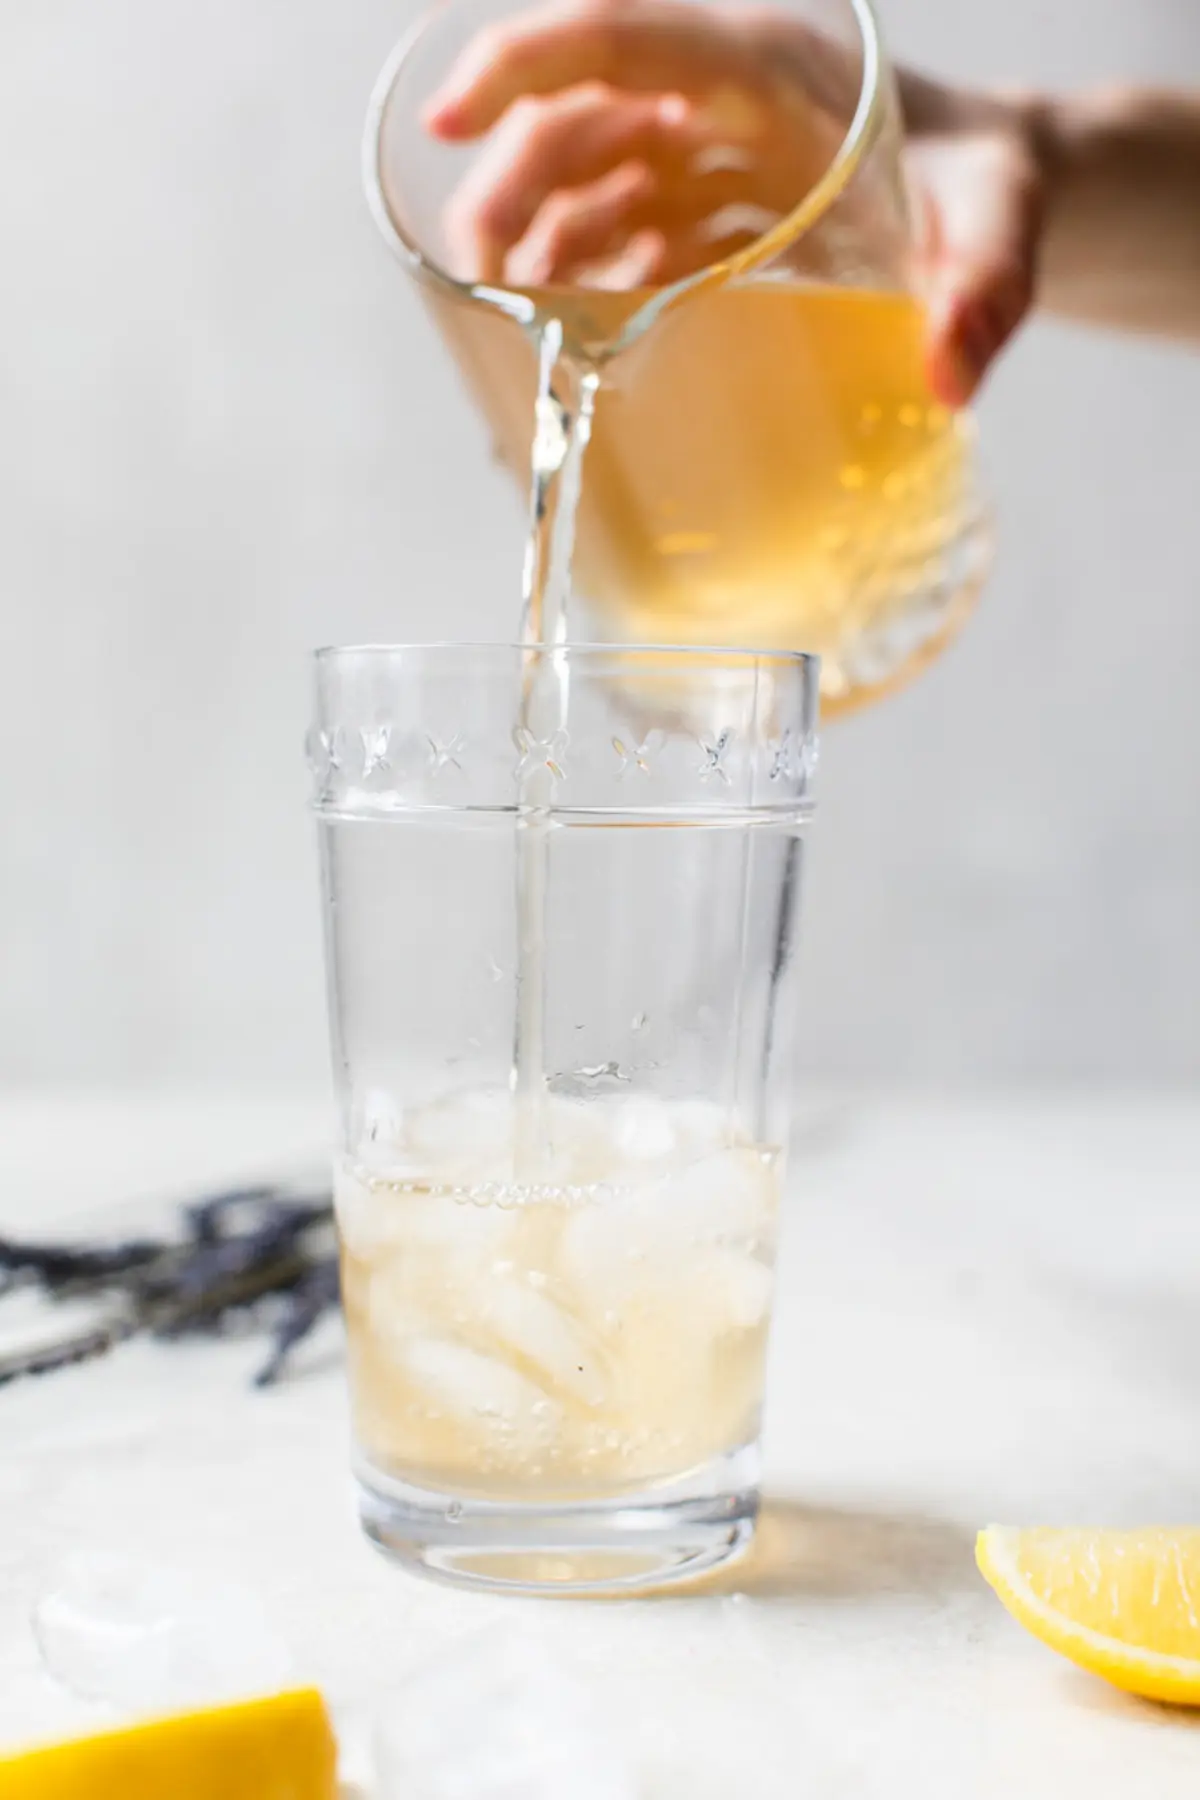 cocktail being poured into a glass filled with ice